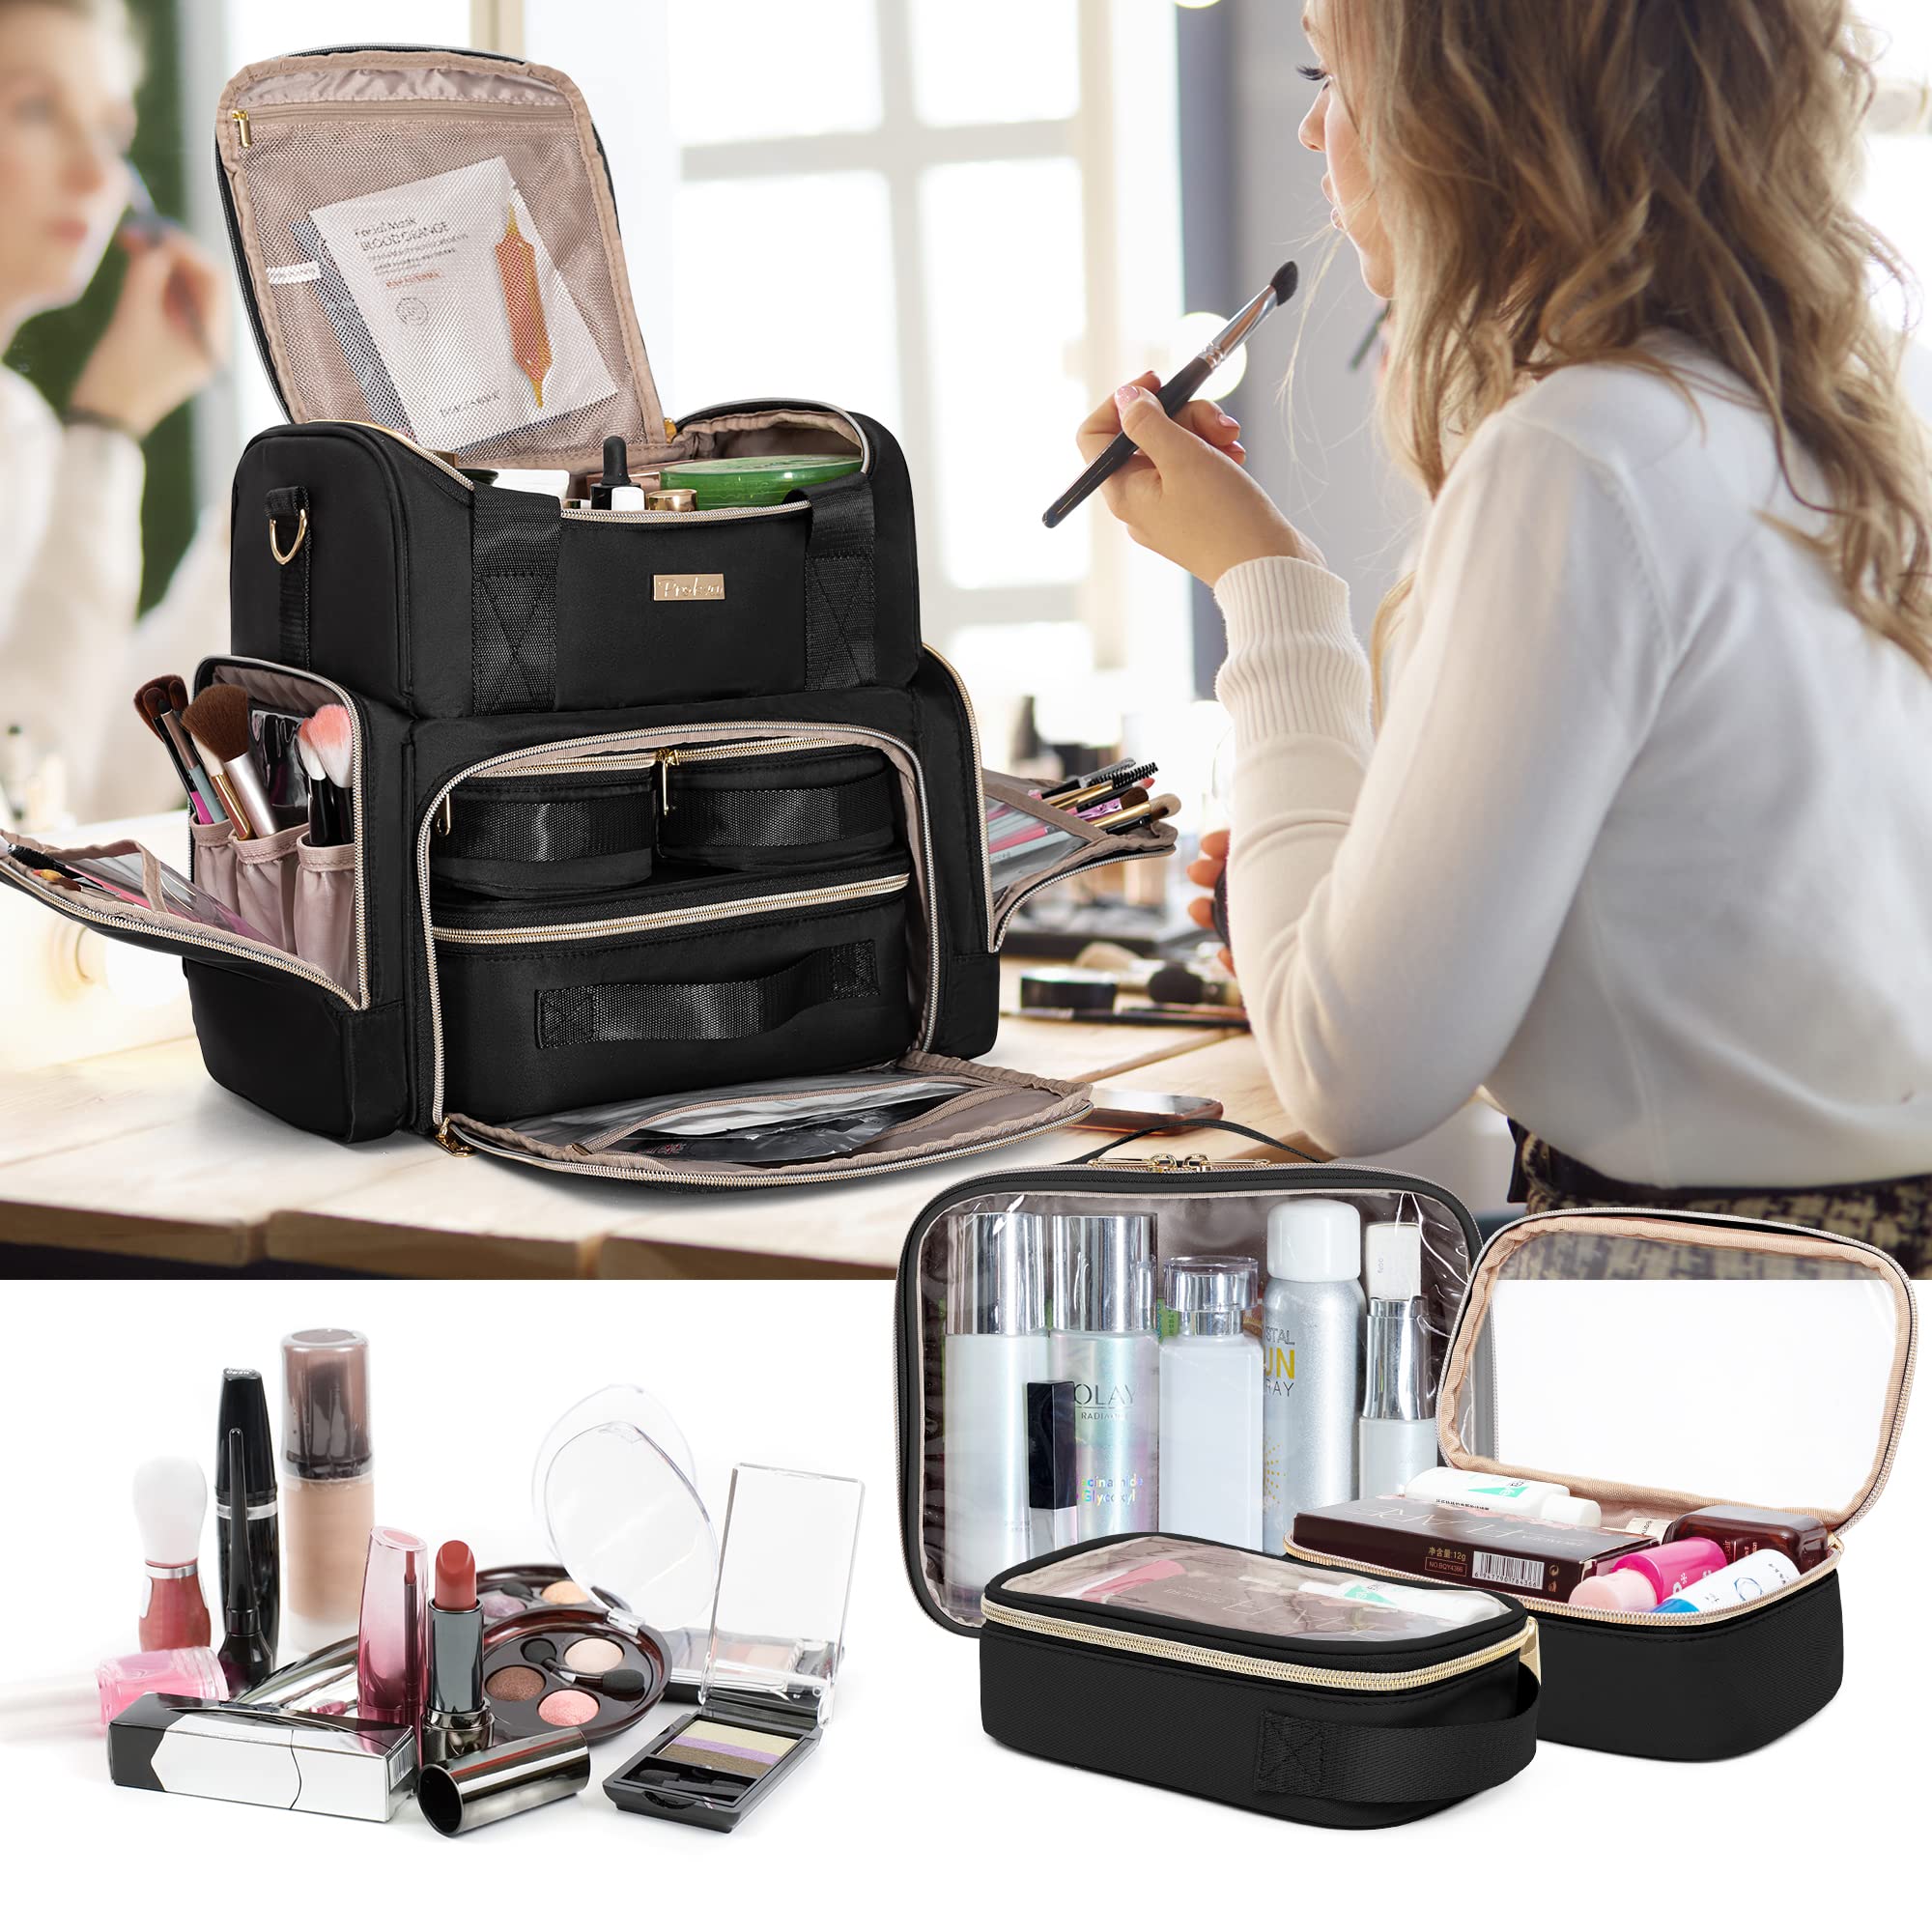 Prokva Large Makeup Cosmetic Bag with 3 Removable Case, Double Layer Travel Makeup Organizer Case with Inner Dividers and Makeup Brushes Storage Section, Black (Patented Design)